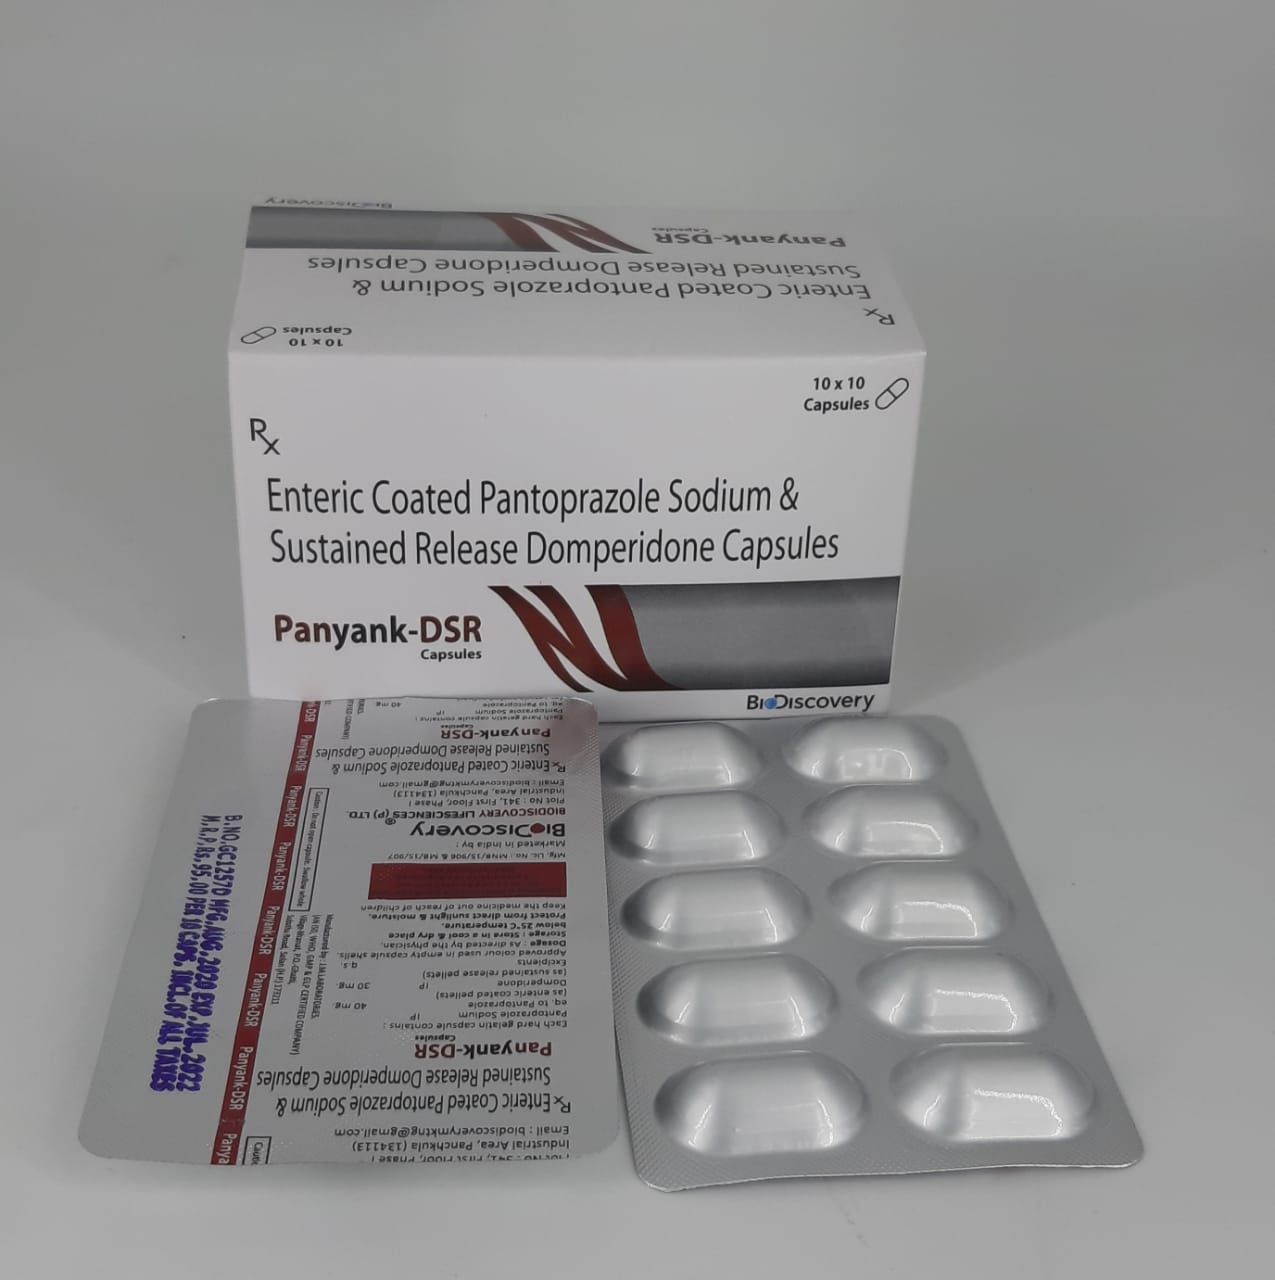 Product Name: Panyank DSR, Compositions of Panyank DSR are Enteric Coated Pantoprazole Sodium & Sustained Release Domperidone Capsules - Biodiscovery Lifesciences Pvt Ltd